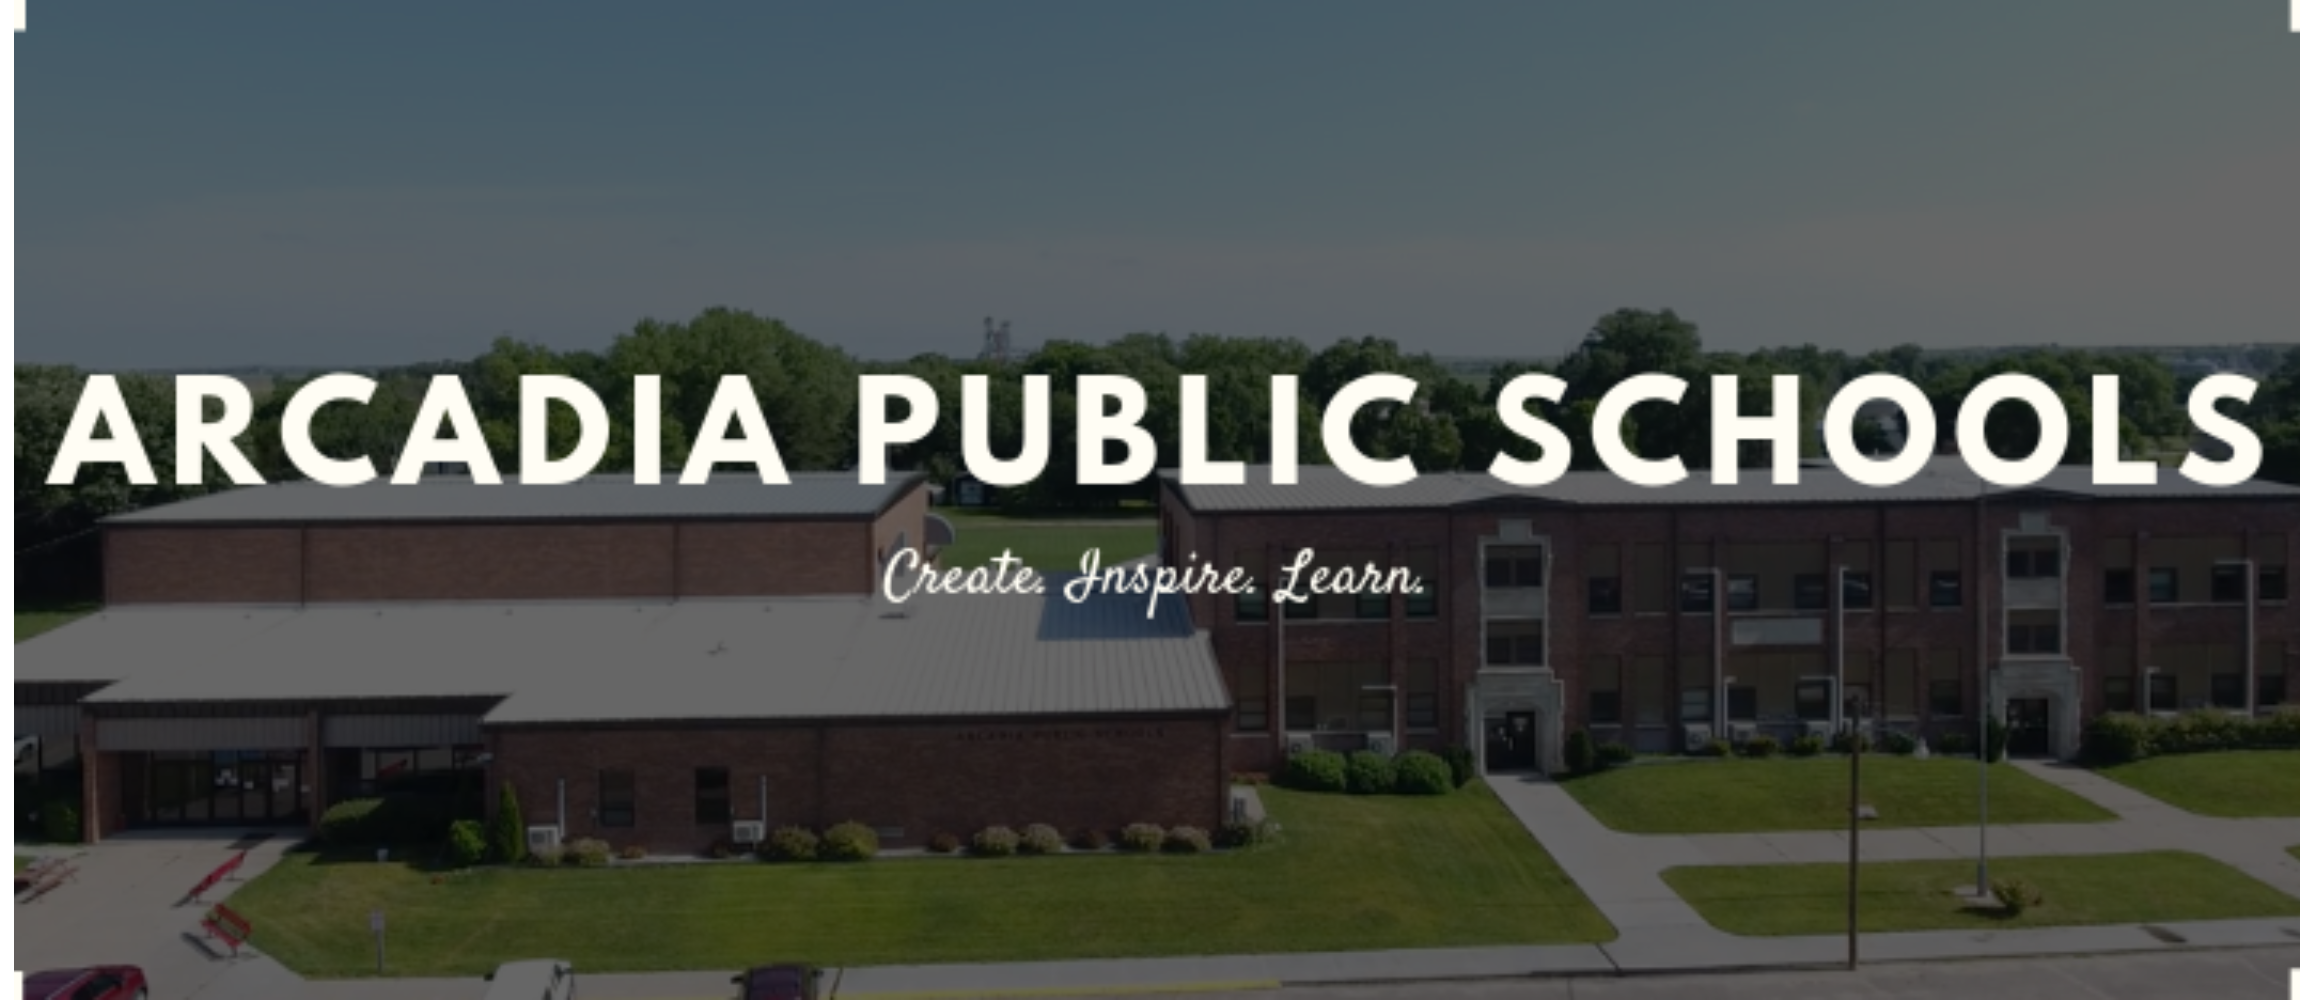 Arcadia Public Schools written on top of a photo of the schools